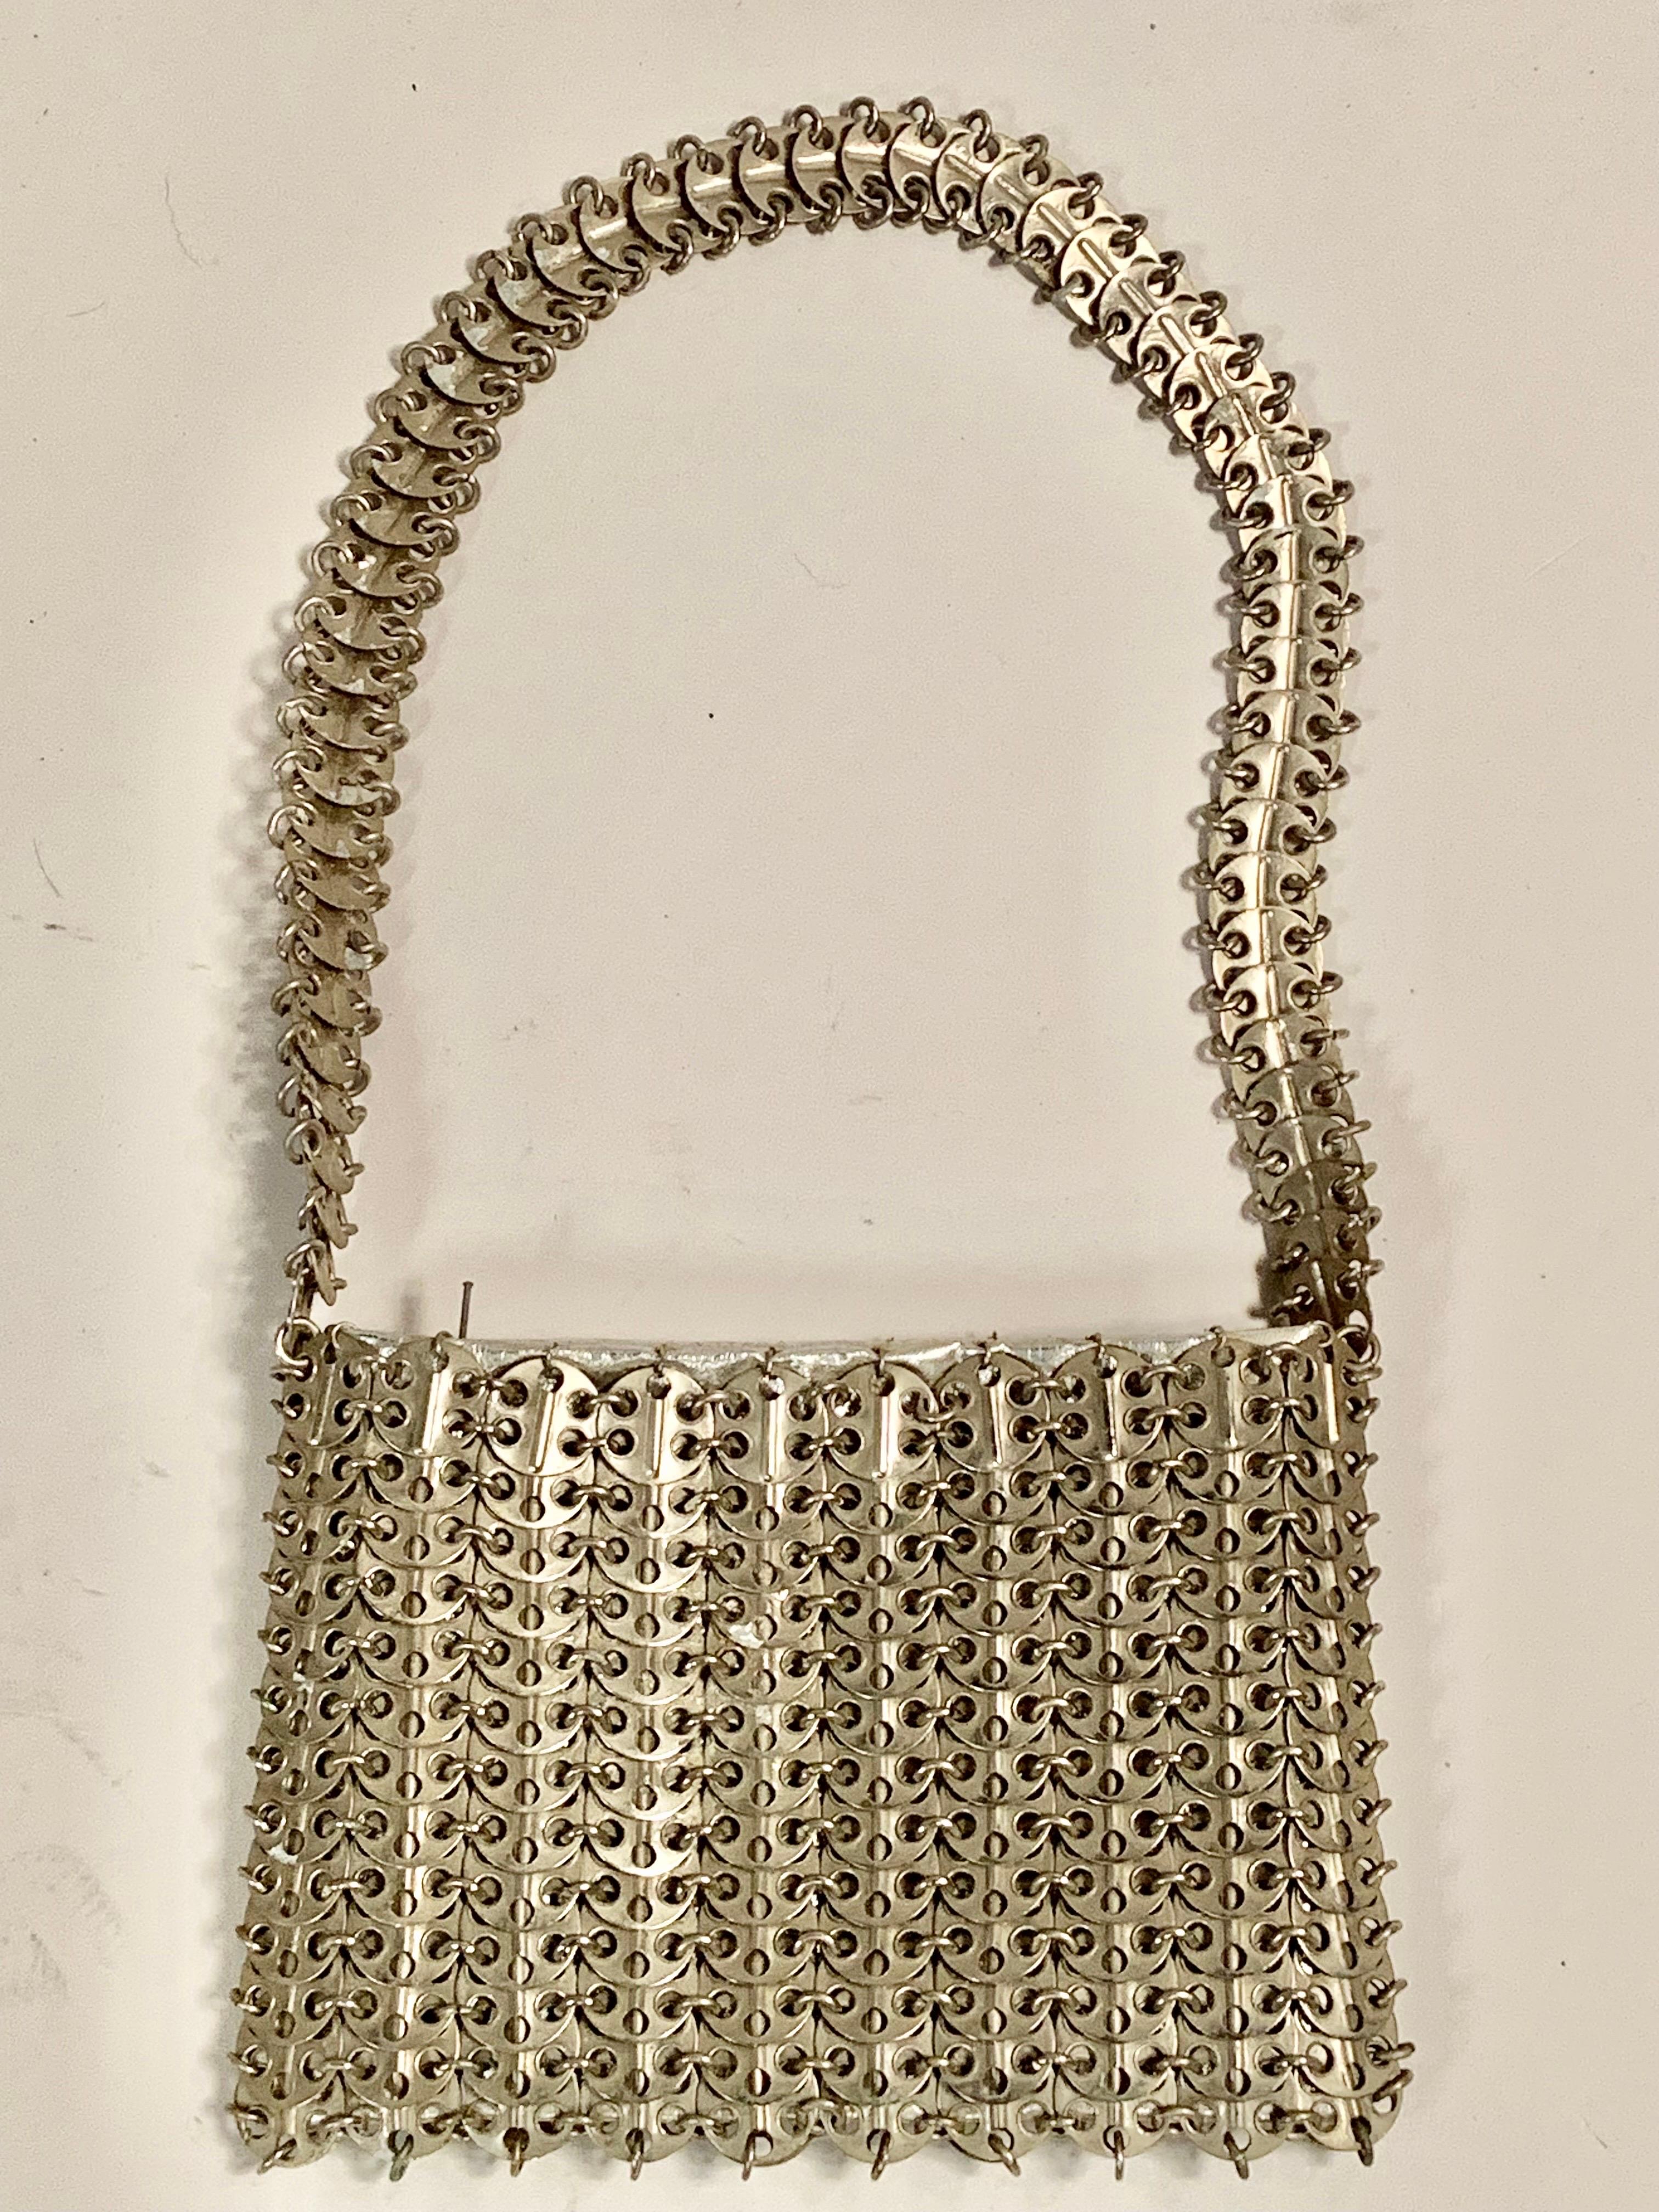 Paco Rabanne Metal Disc Bag circa 1969 In Excellent Condition For Sale In New Hope, PA